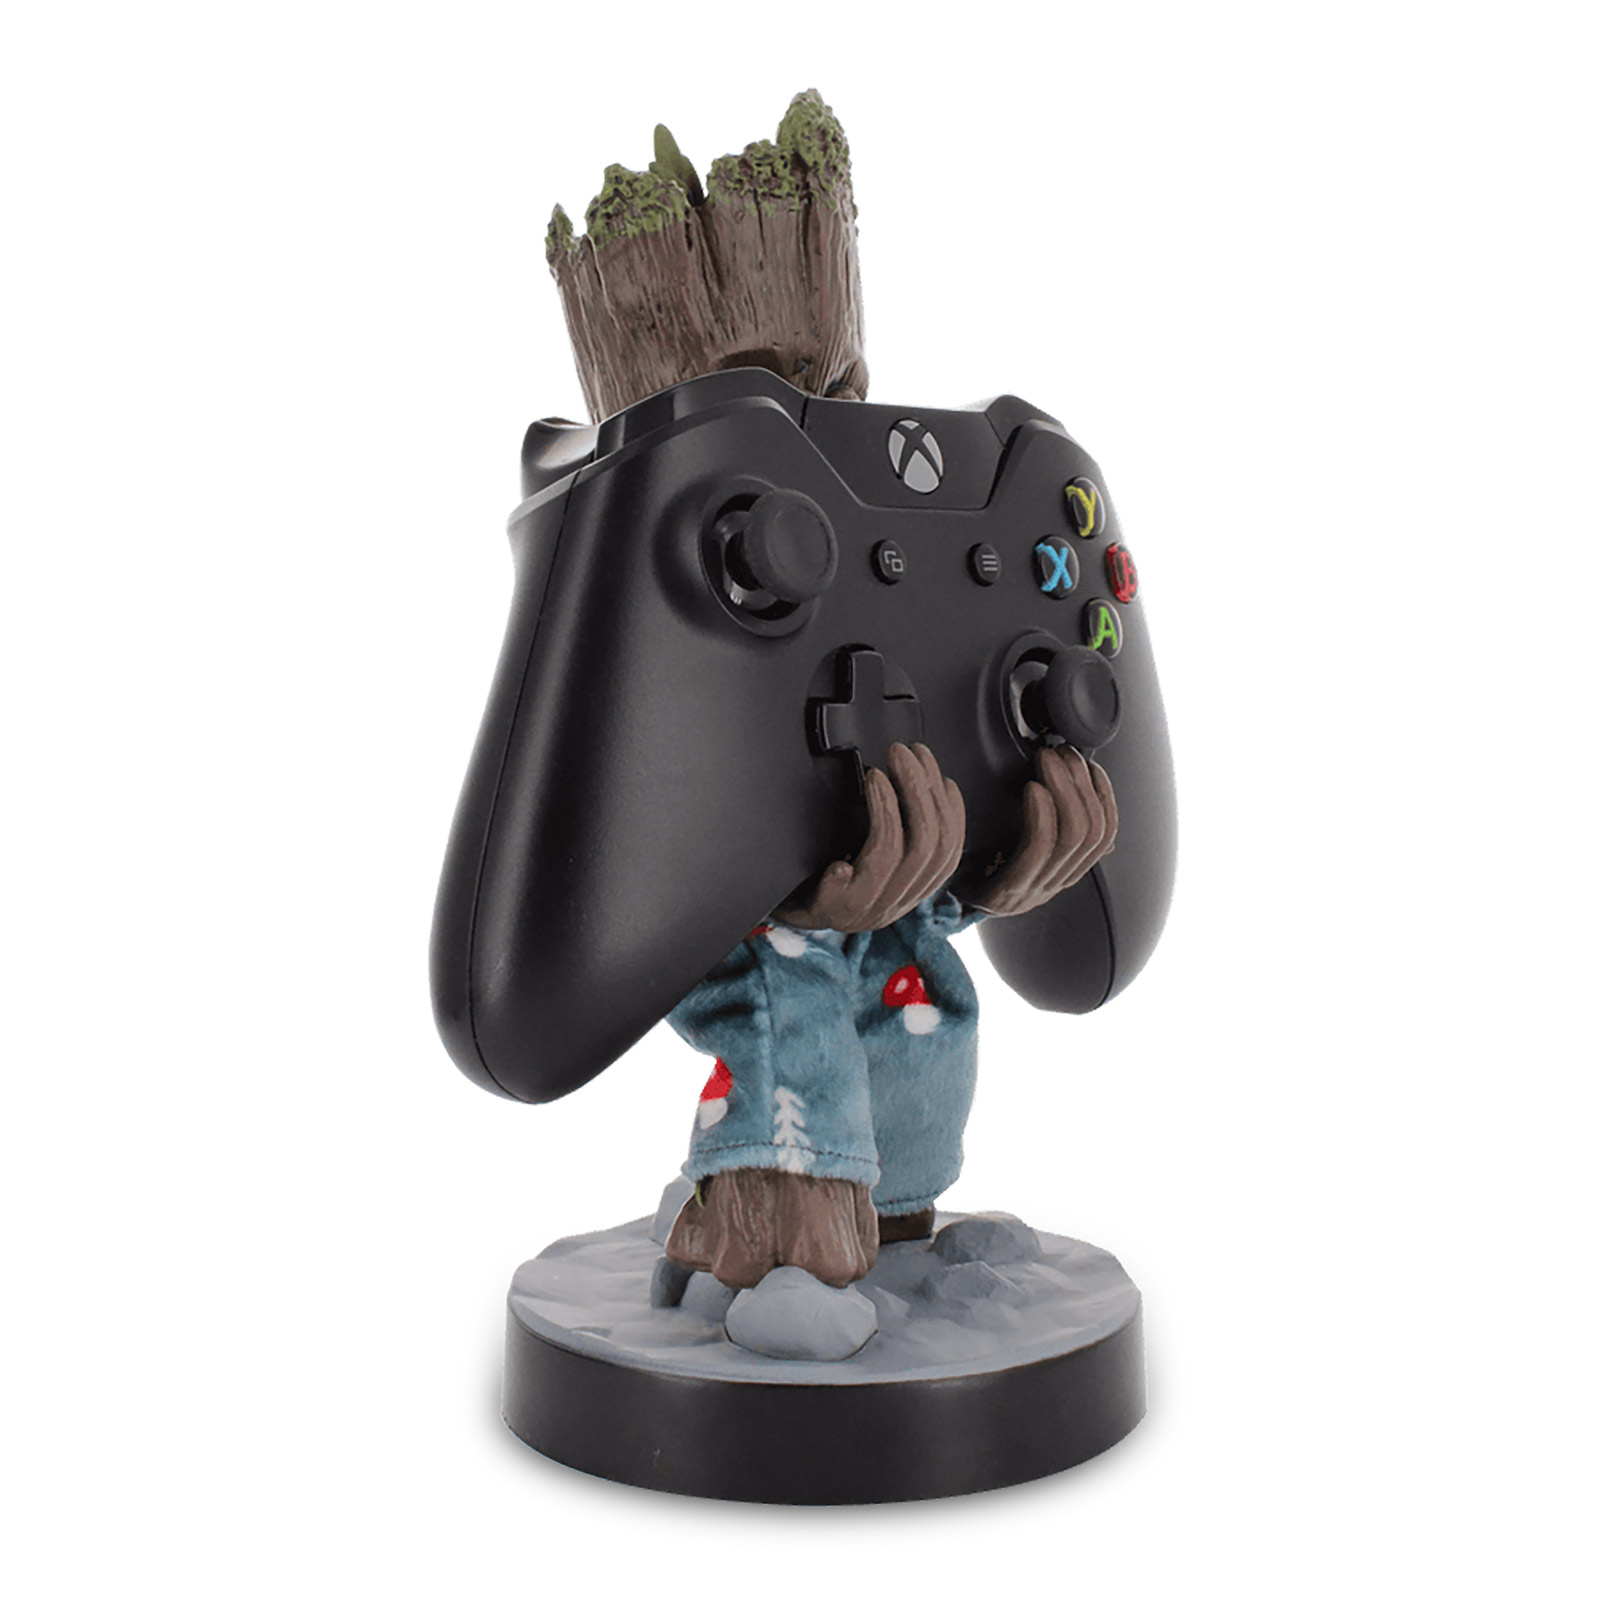 Guardians of the Galaxy - Pyjama Groot Cable Guy Figuur